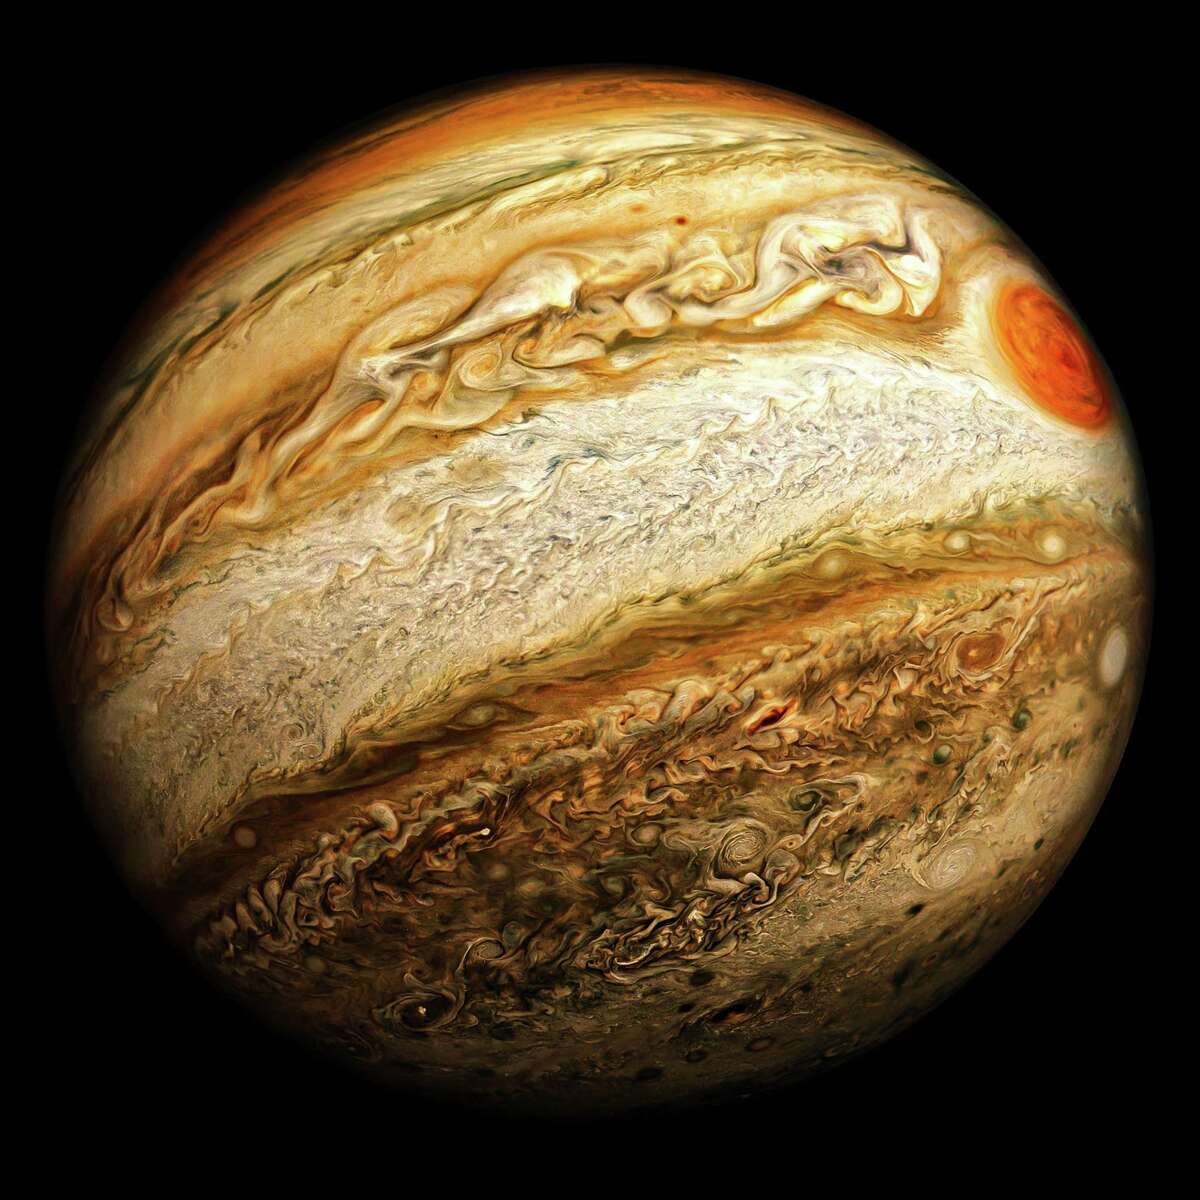 NASA has extended the Juno mission, led by Scott Bolton of Southwest Research Institute, to explore Jupiter through September 2025, expanding the science goals to include the overall Jovian system, made up of the planet and its rings and moons. Juno includes a public outreach instrument that allows citizen scientists to participate in the mission, processing JunoCam data to create images such as this highly enhanced “Orange Marble” image of Jupiter.